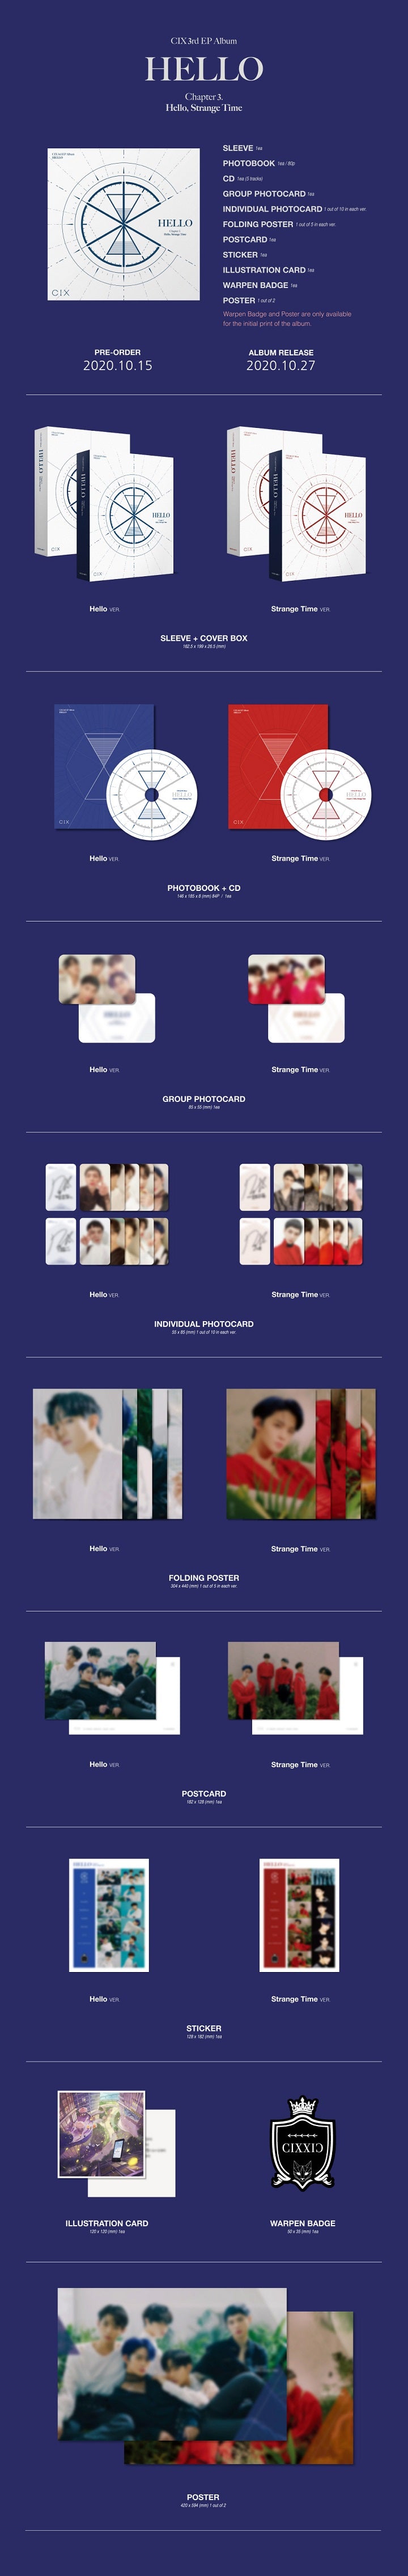 1 CD
1 Photo Book (84 pages)
1 Group Photo Card
1 Individual Photo Card (random out of 10 types)
1 Folding Poster (random ...